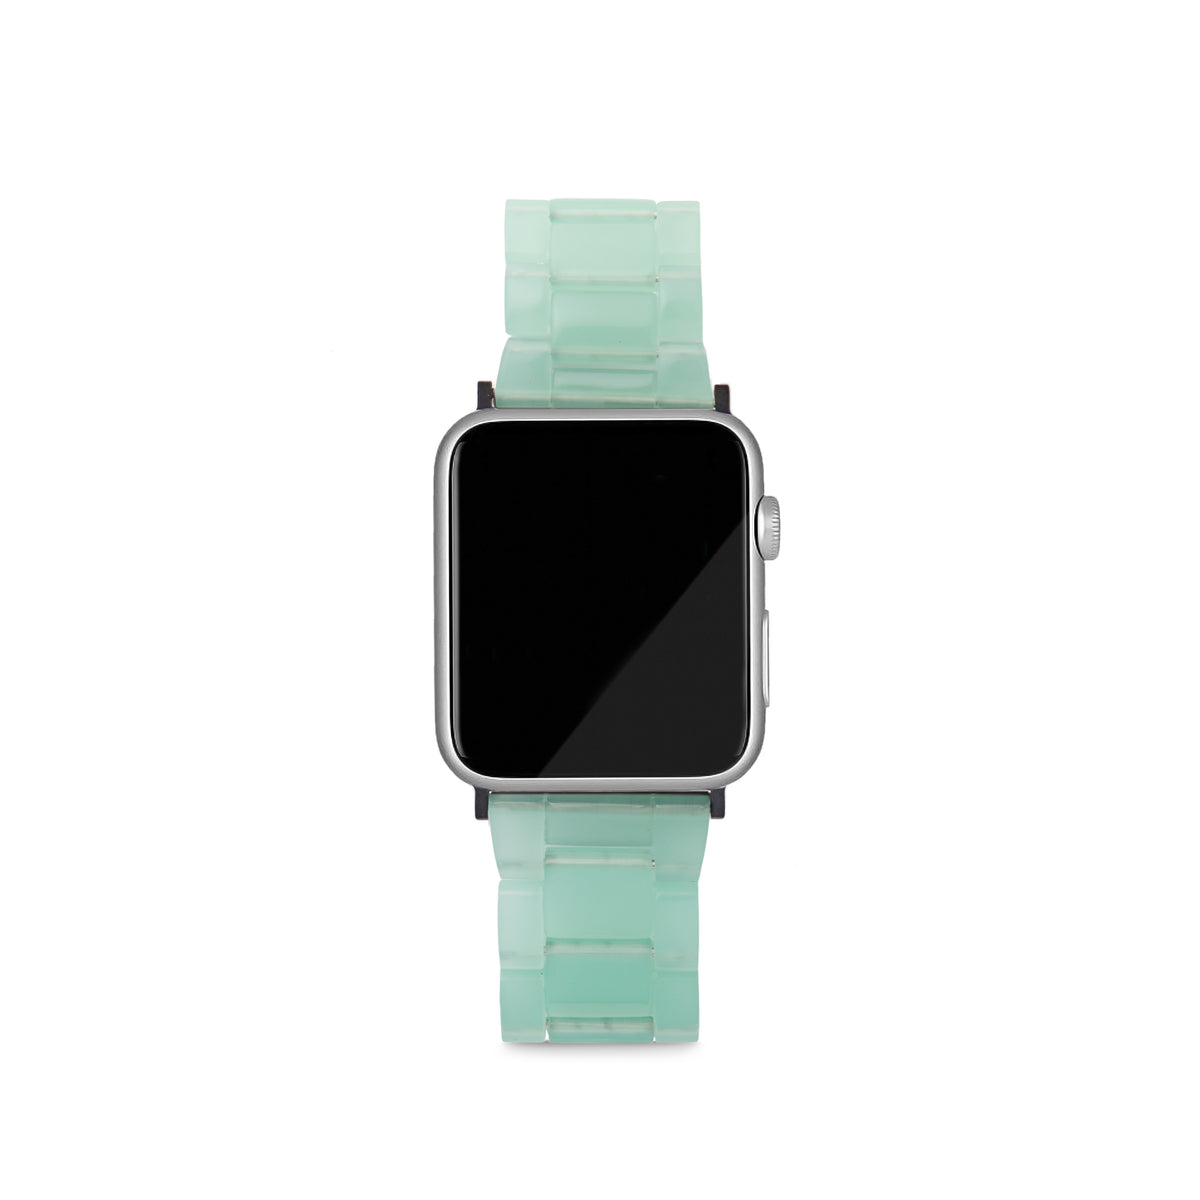 MACHETE Apple Watch Band in Sea Glass Outlet